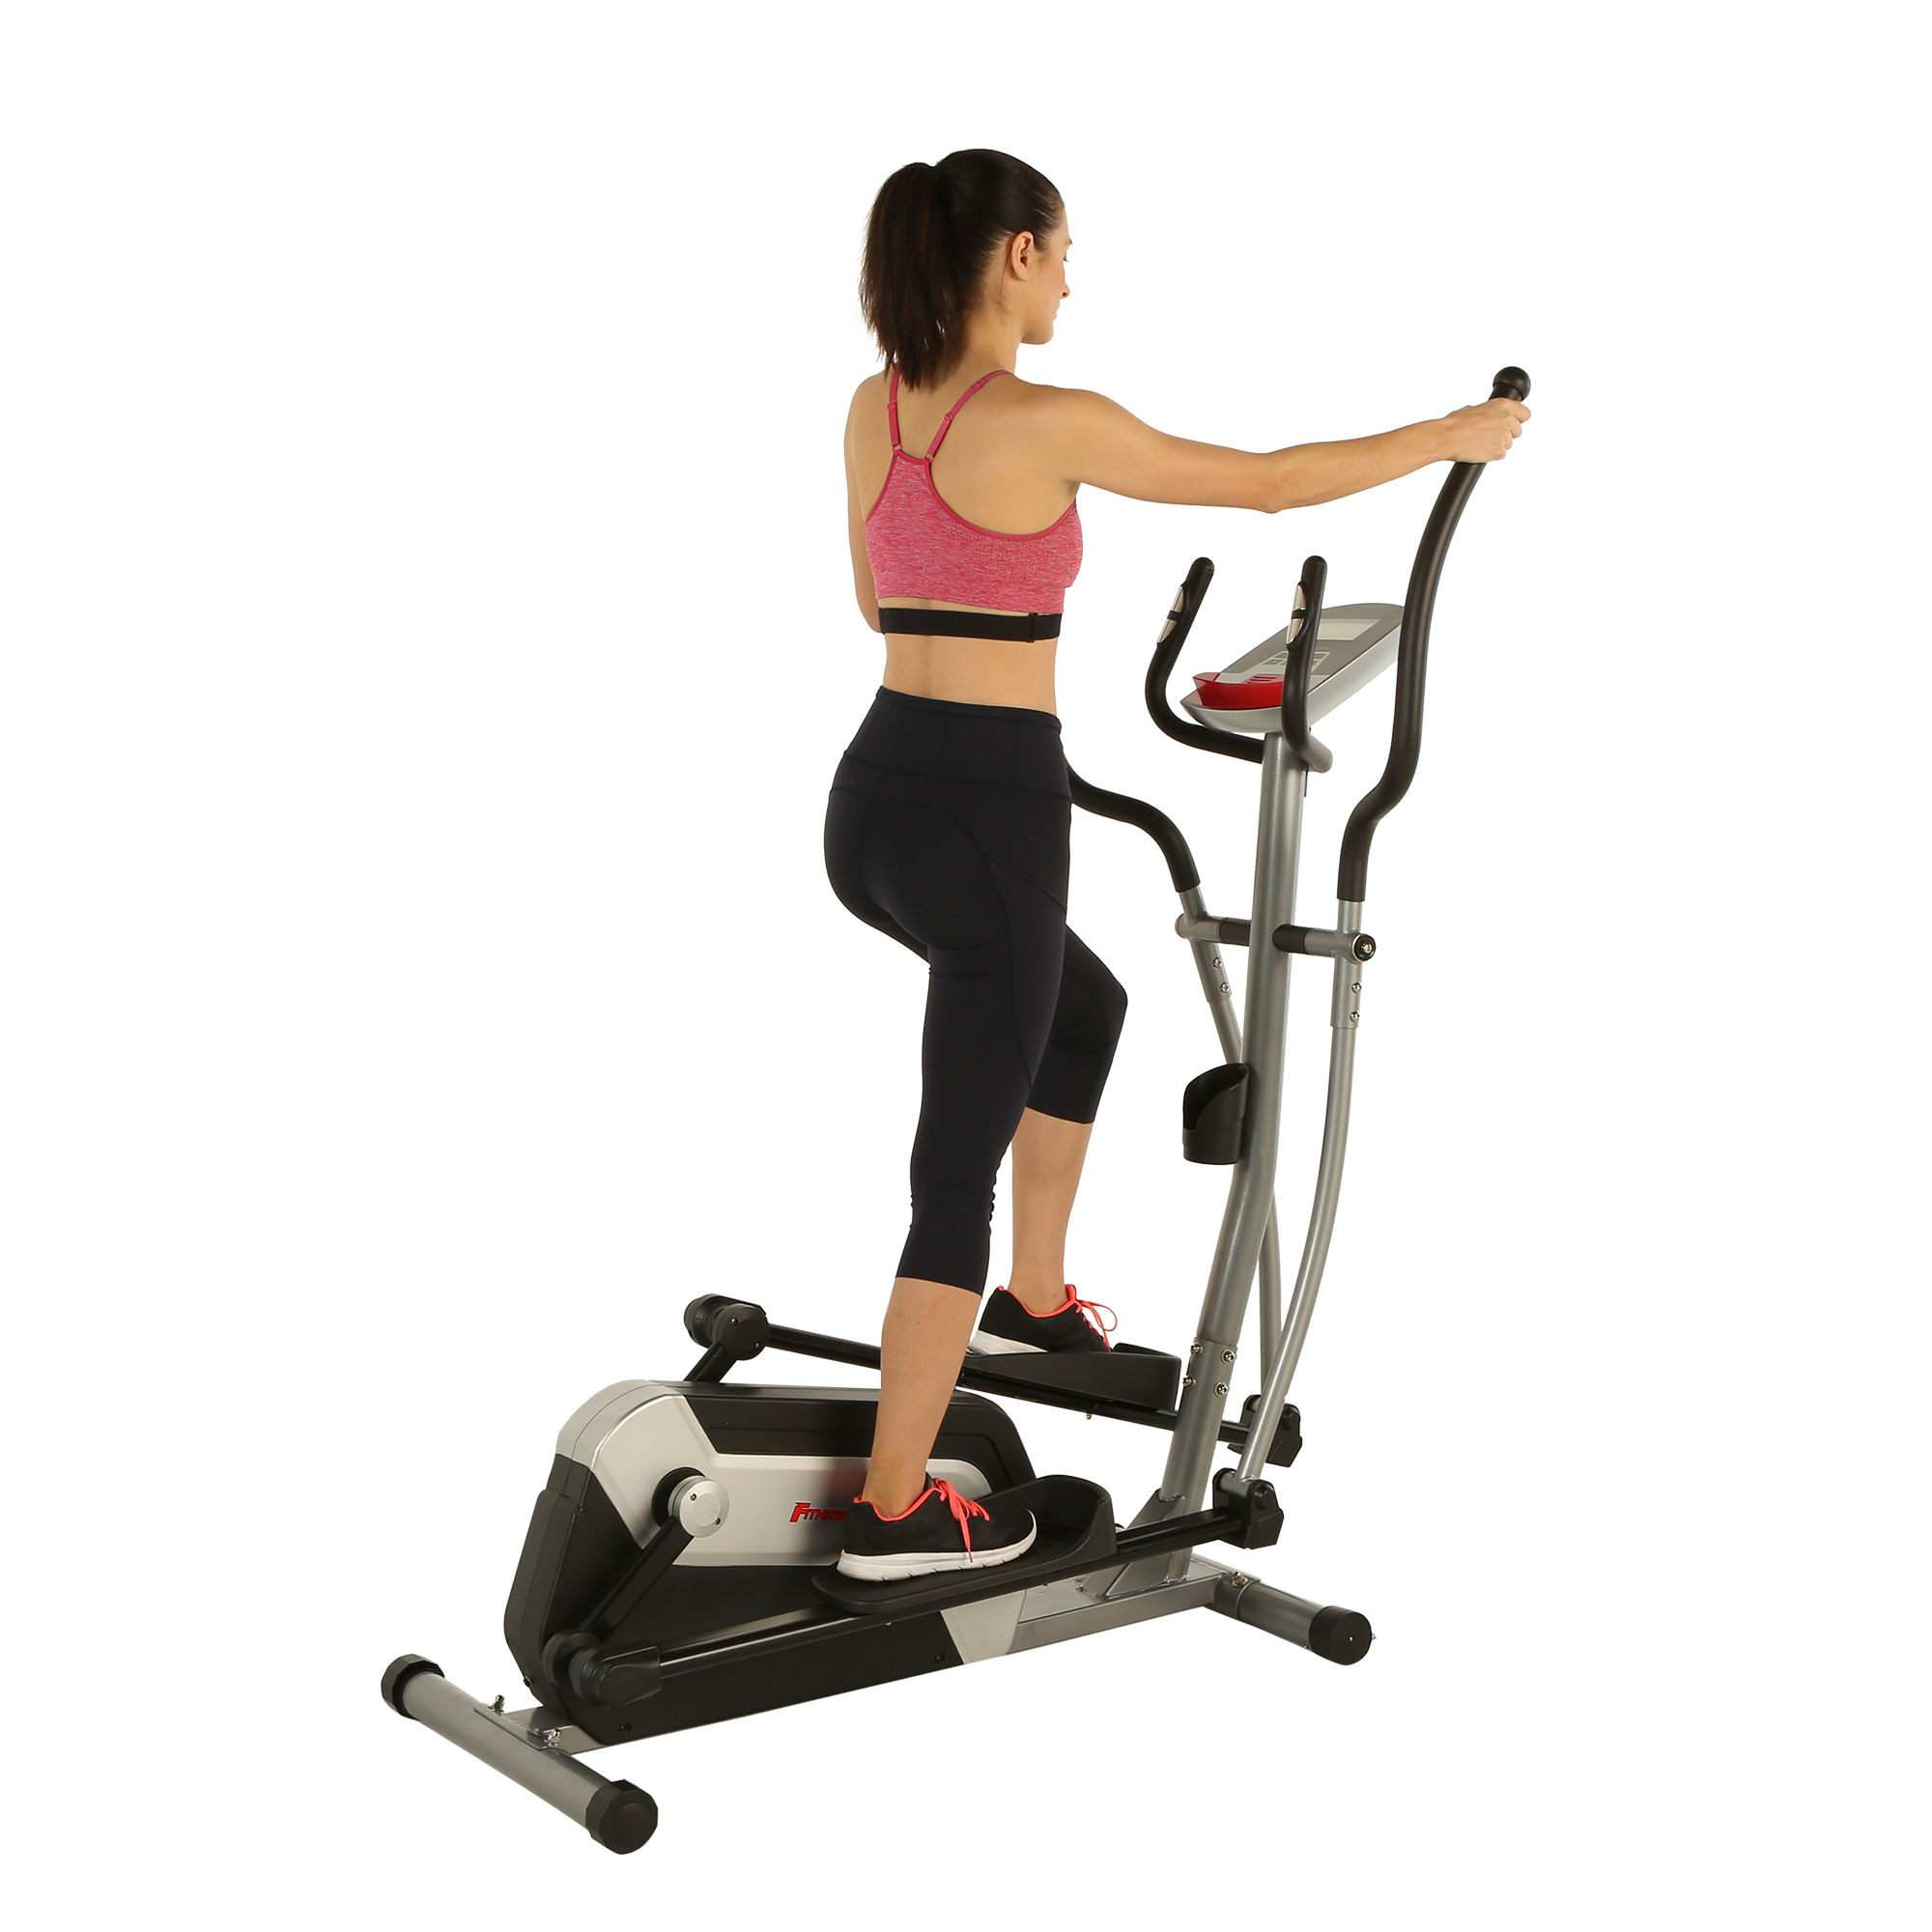 FITNESS REALITY Ei7500XL Bluetooth Magnetic Elliptical Trainer, 18” Stride, Goal Setting and Free App - image 1 of 20